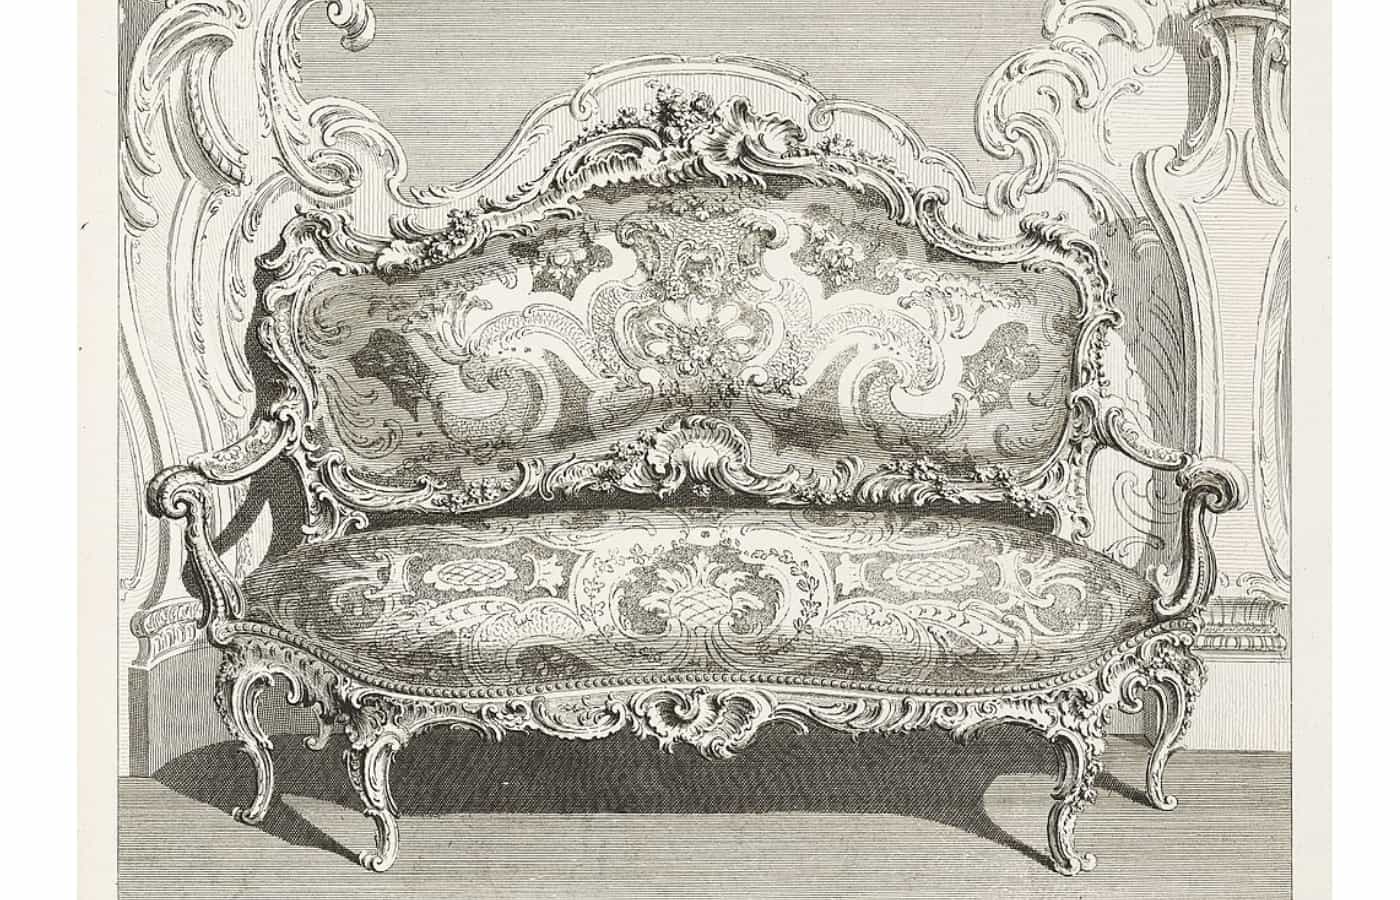 Canapé designed by Meissonnier for Count Bielinski, Warsaw, Poland (1735) (1)